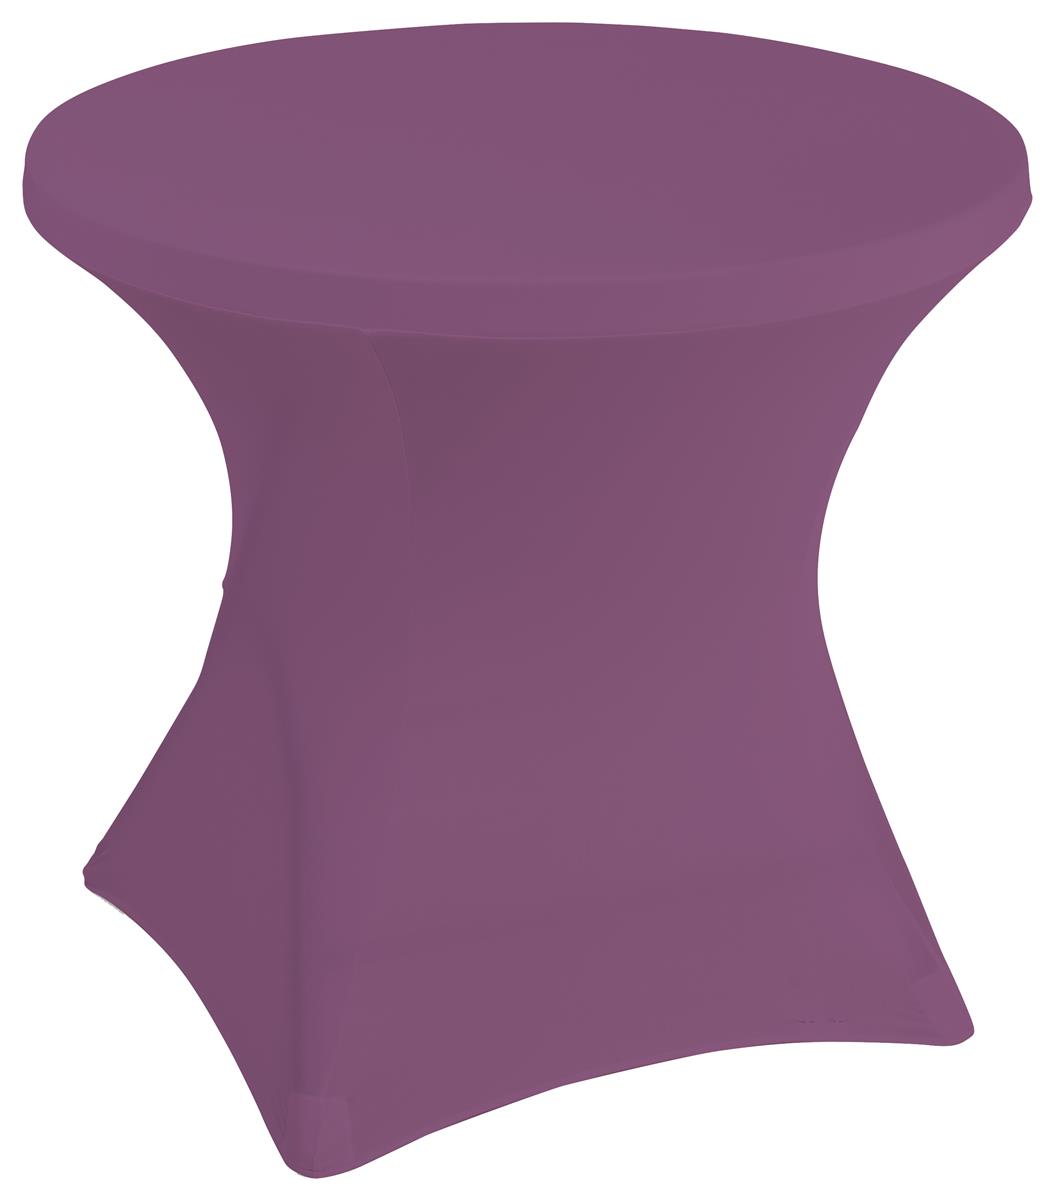 Purple stretch polyester tablecloths with machine washable fabric